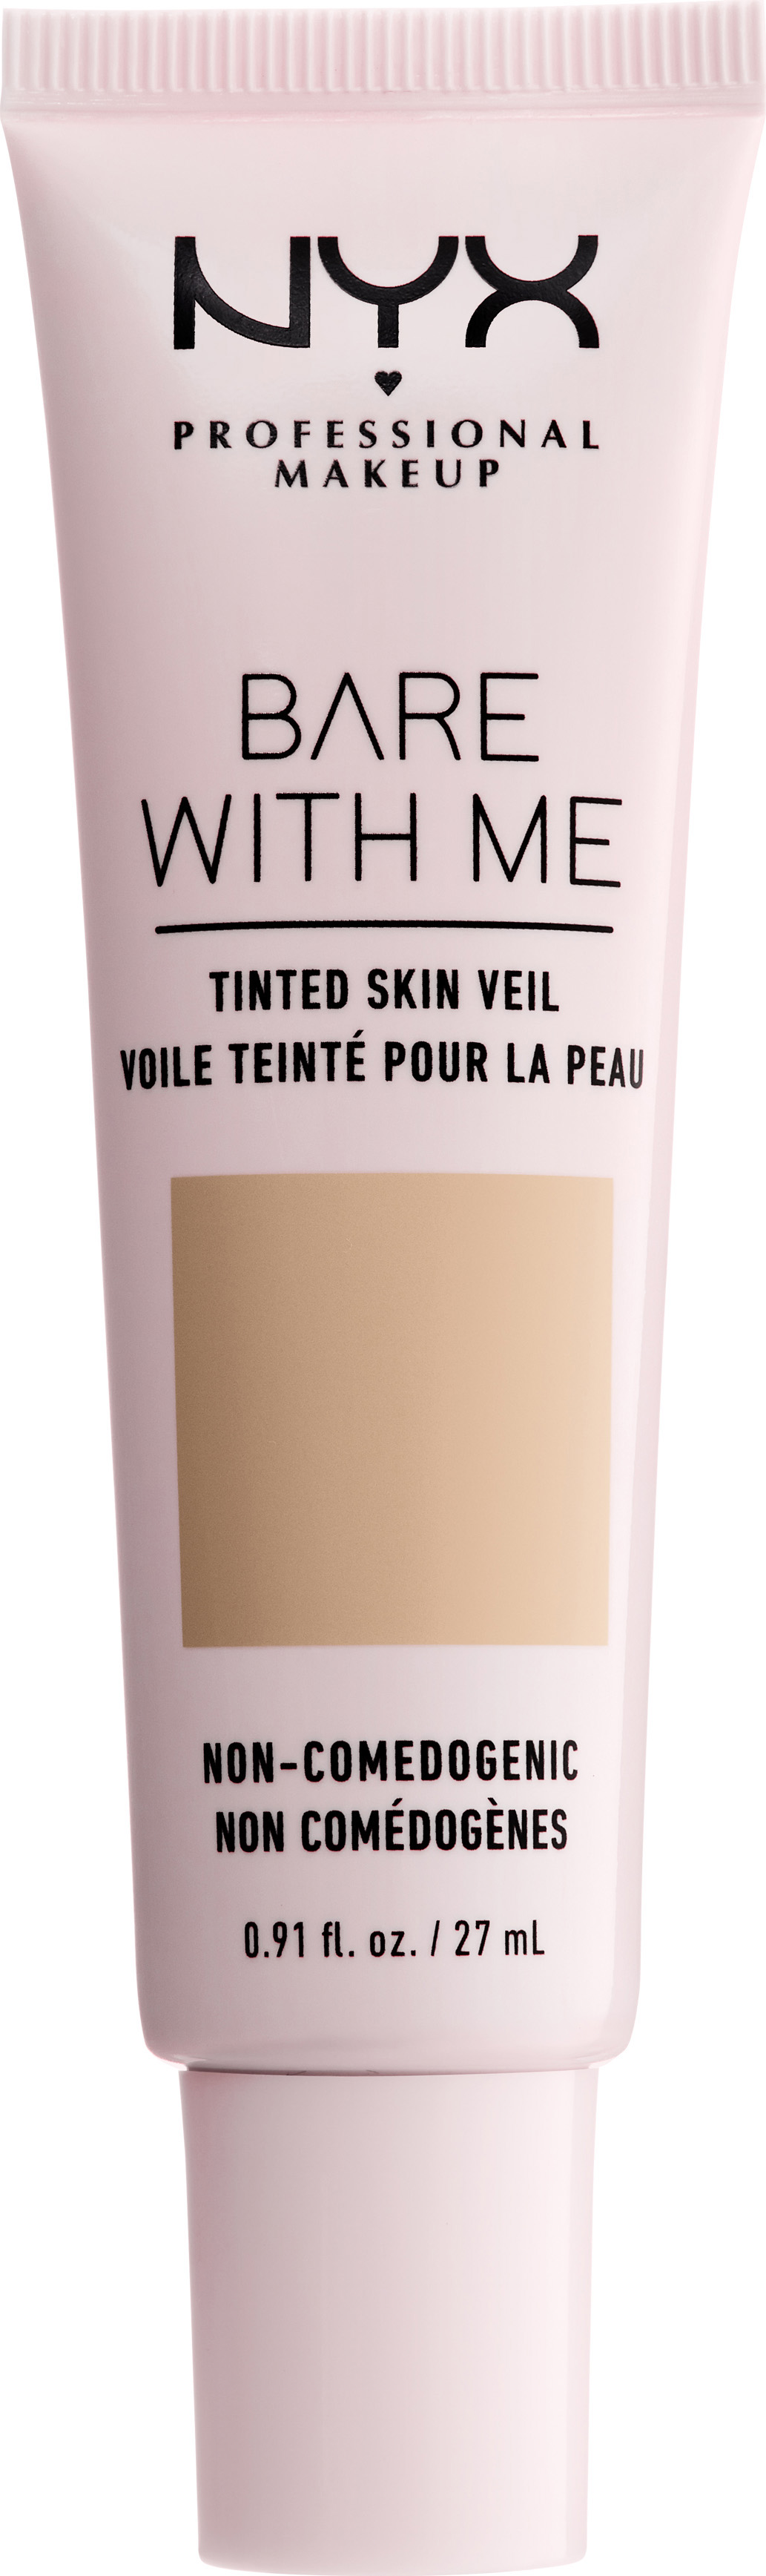 NYX Professional Makeup - Bare With Me Tinted Skin Veil - Natural Soft Beige